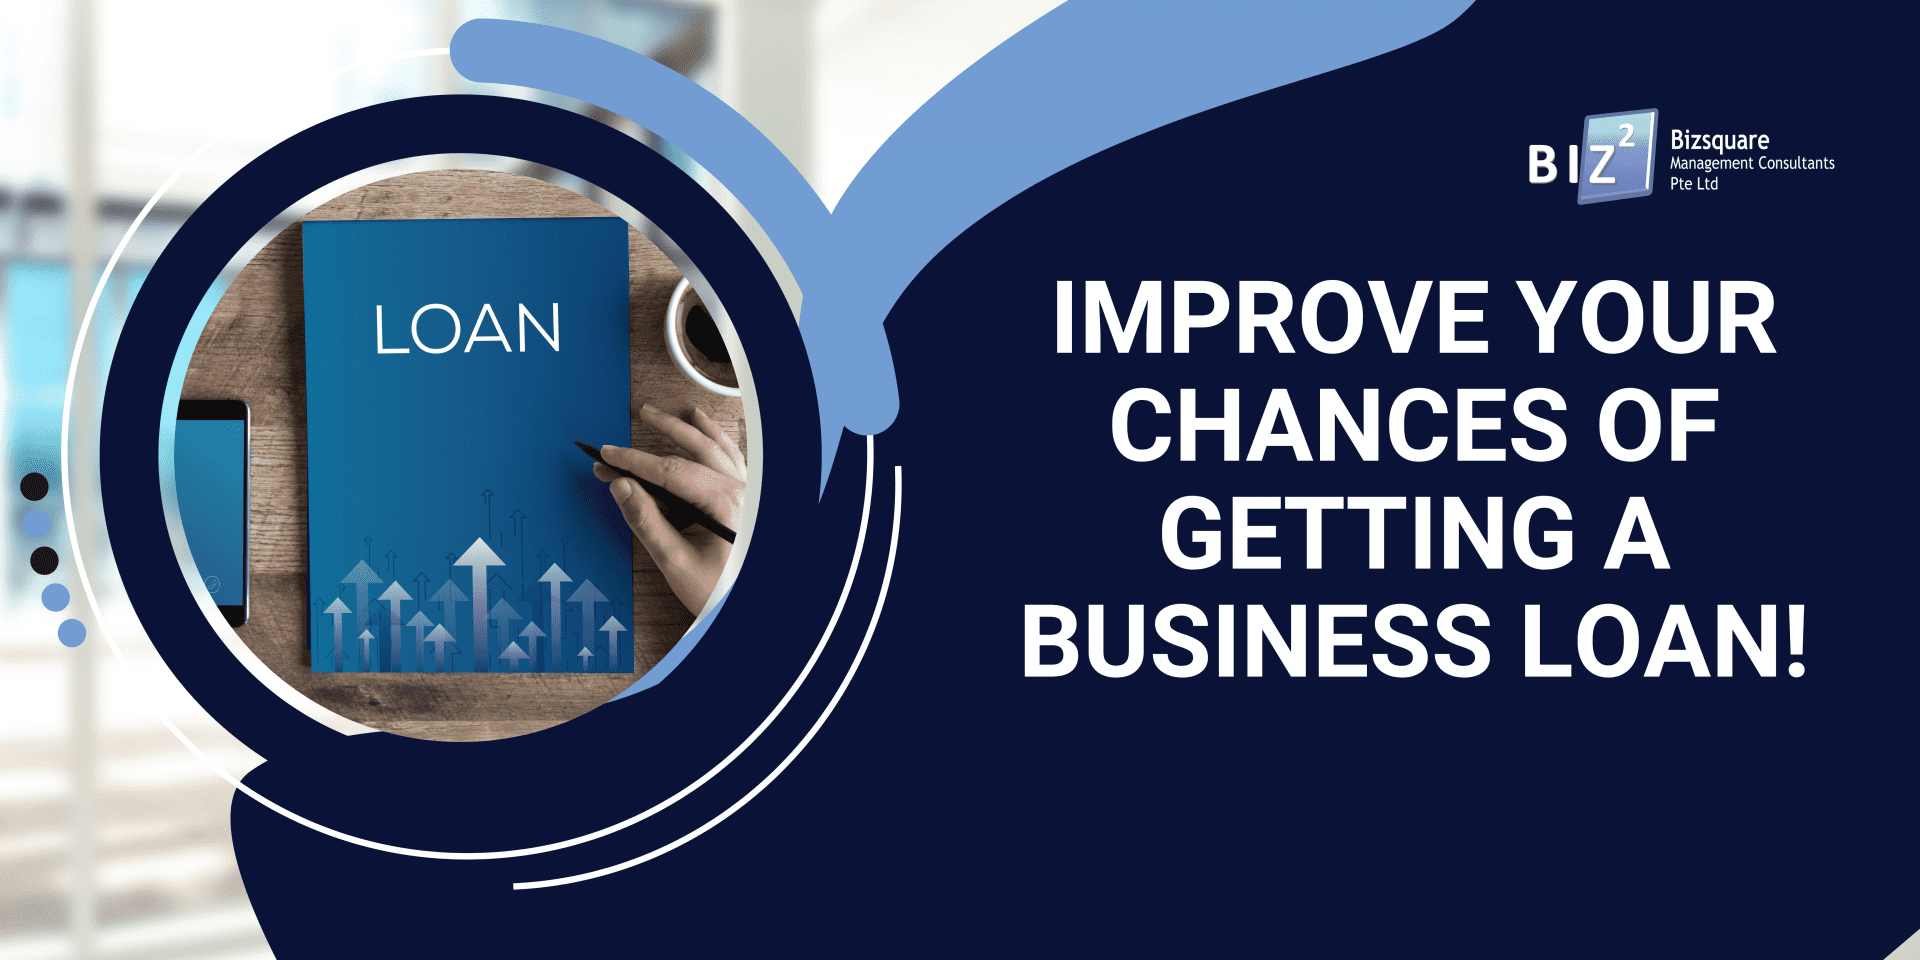 Improve the Chances of getting a business loan